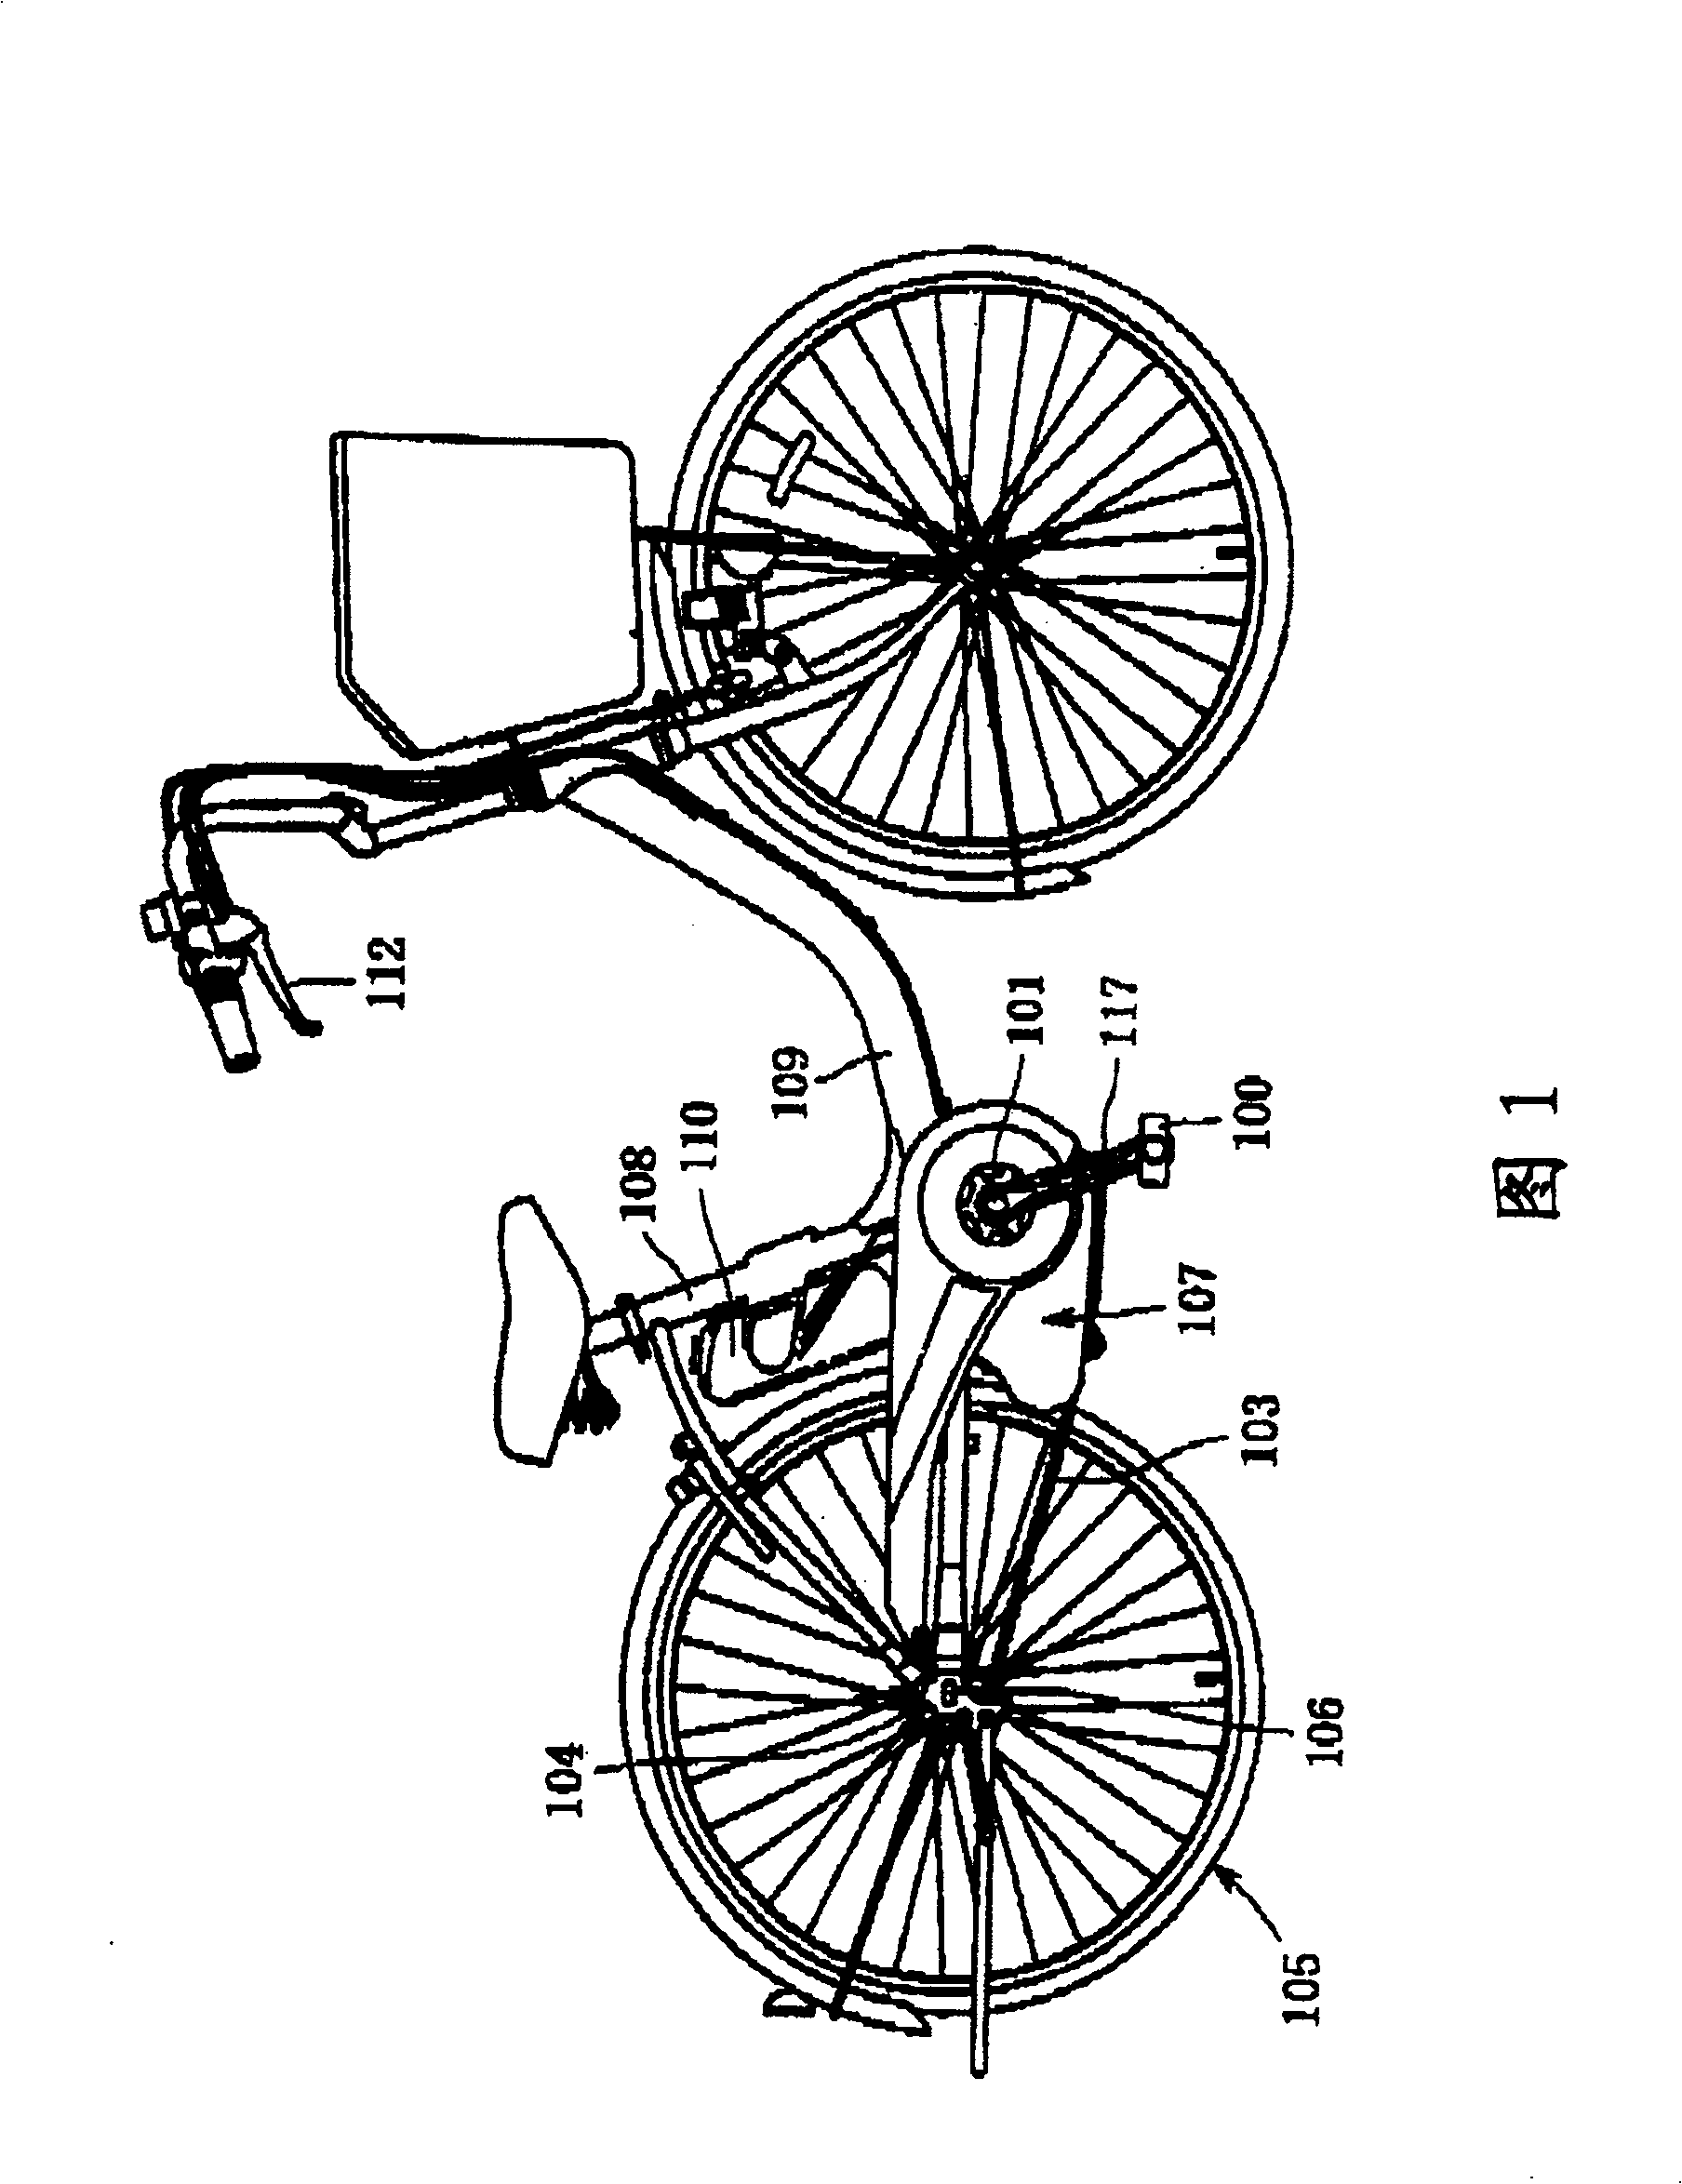 Electric assisting bicycles